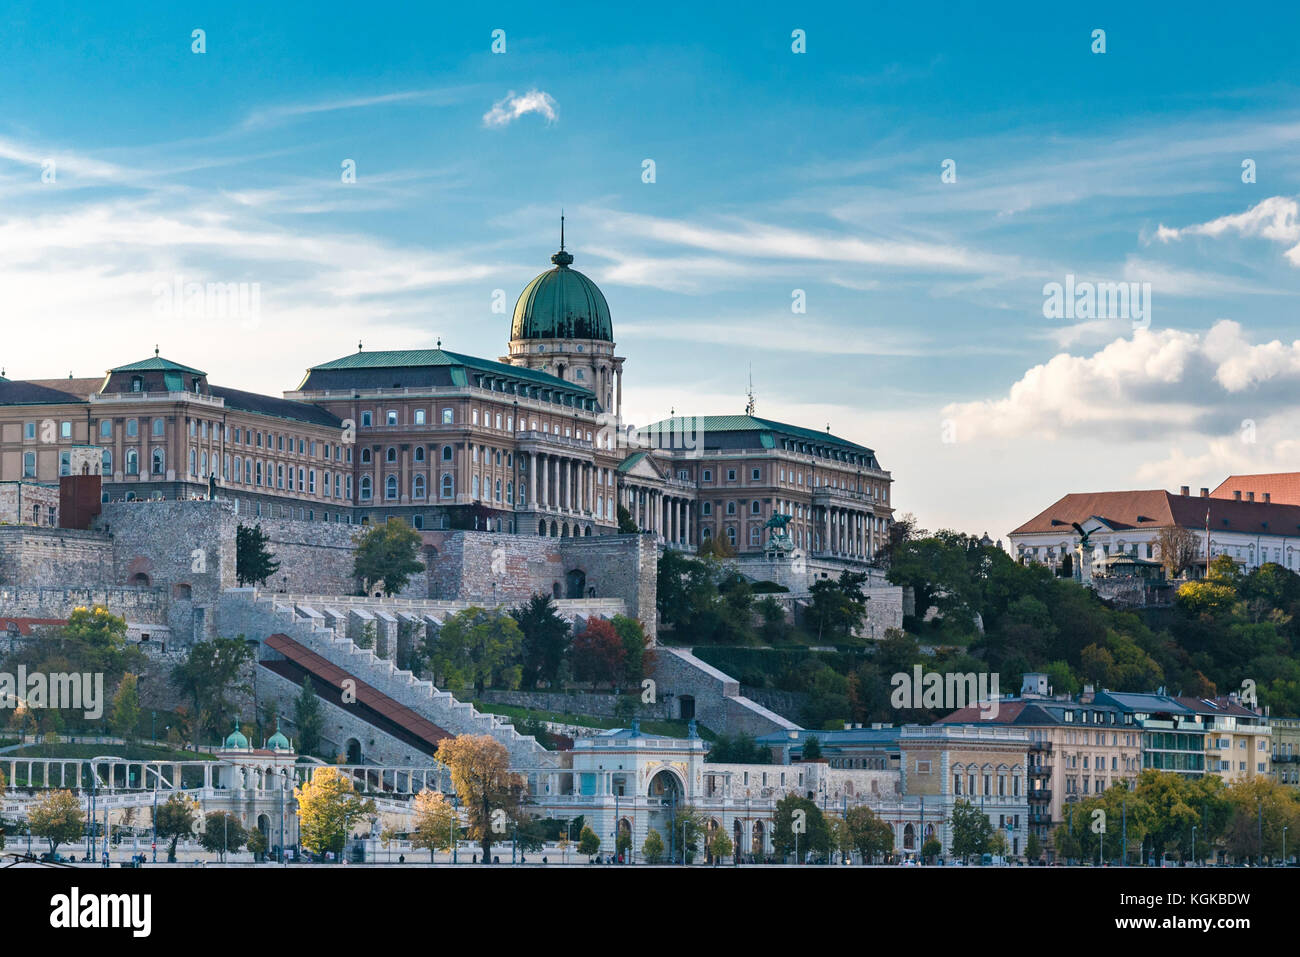 Panoramic city view of historic Royal Palace on the Buda Castle Hill. Scenic cityscape of historic district of Buda, in Budapest, Hungary. Stock Photo